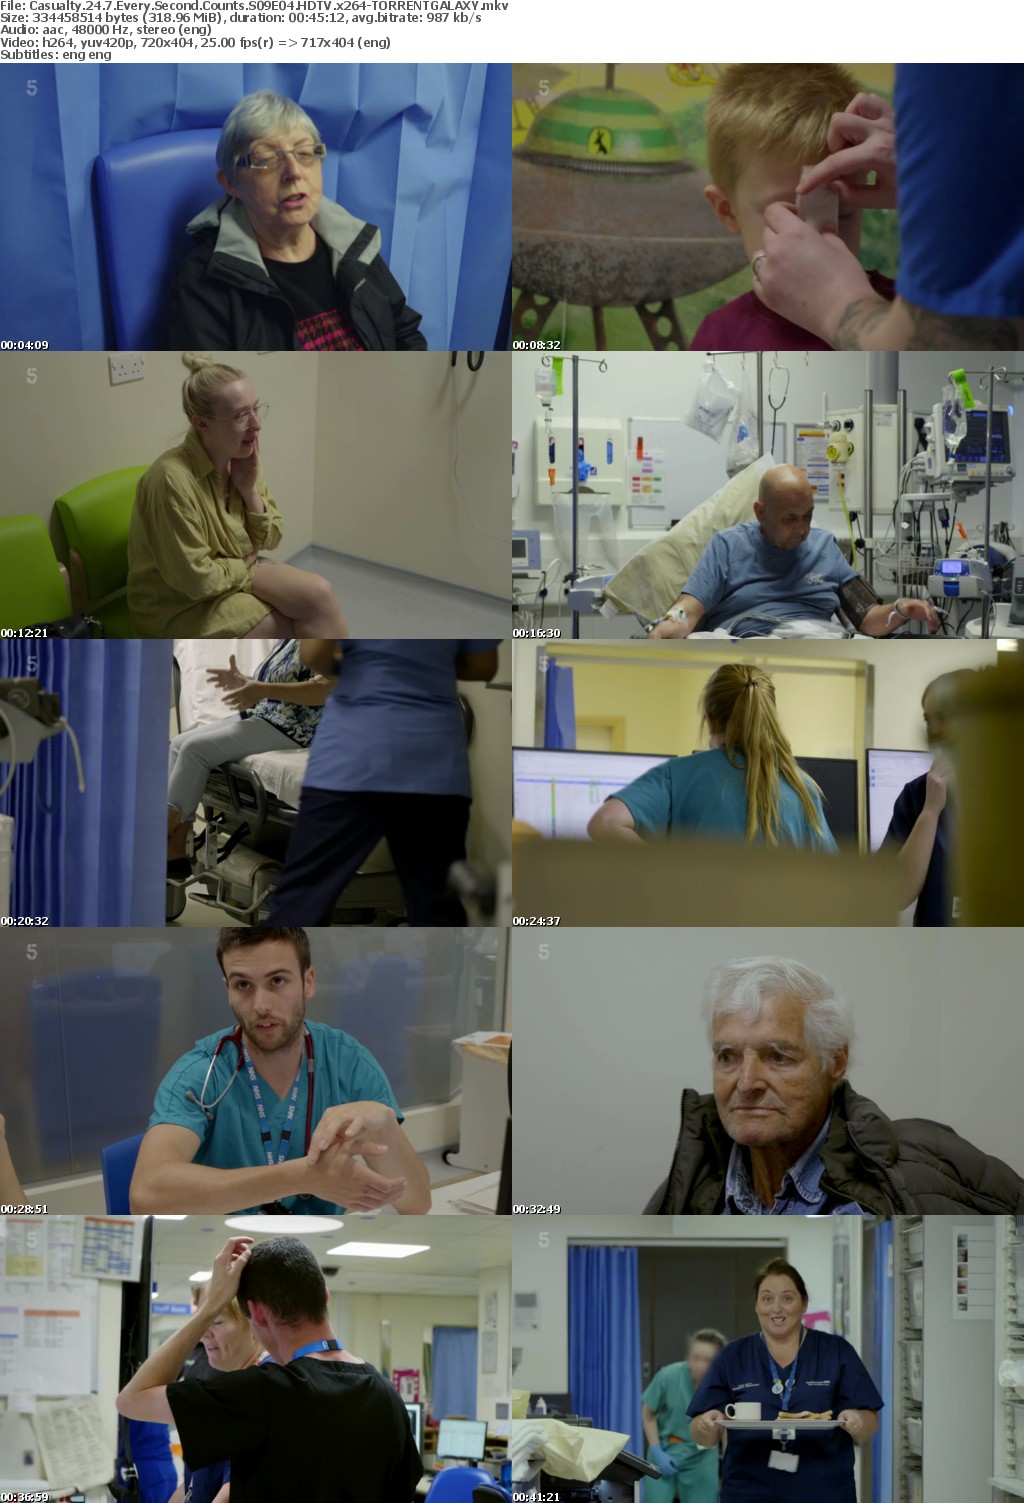 Casualty 24 7 Every Second Counts S09E04 HDTV x264-GALAXY